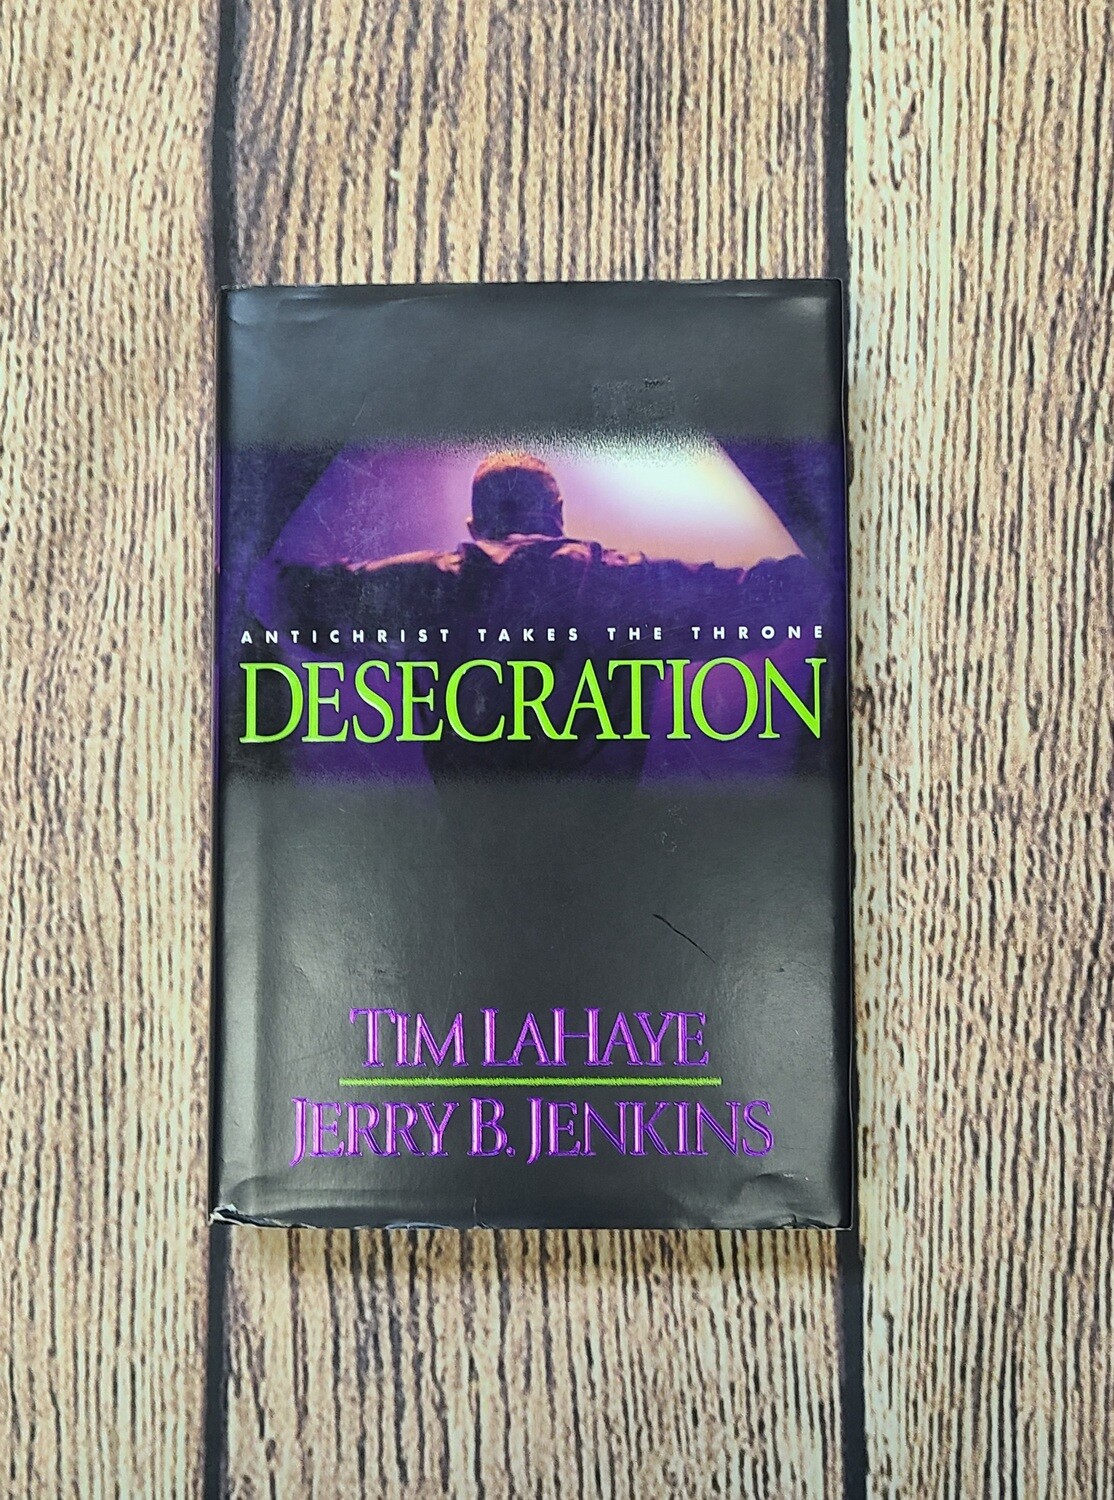 Desecration: Antichrist Takes The Throne by Tim LaHaye and Jerry B. Jenkins